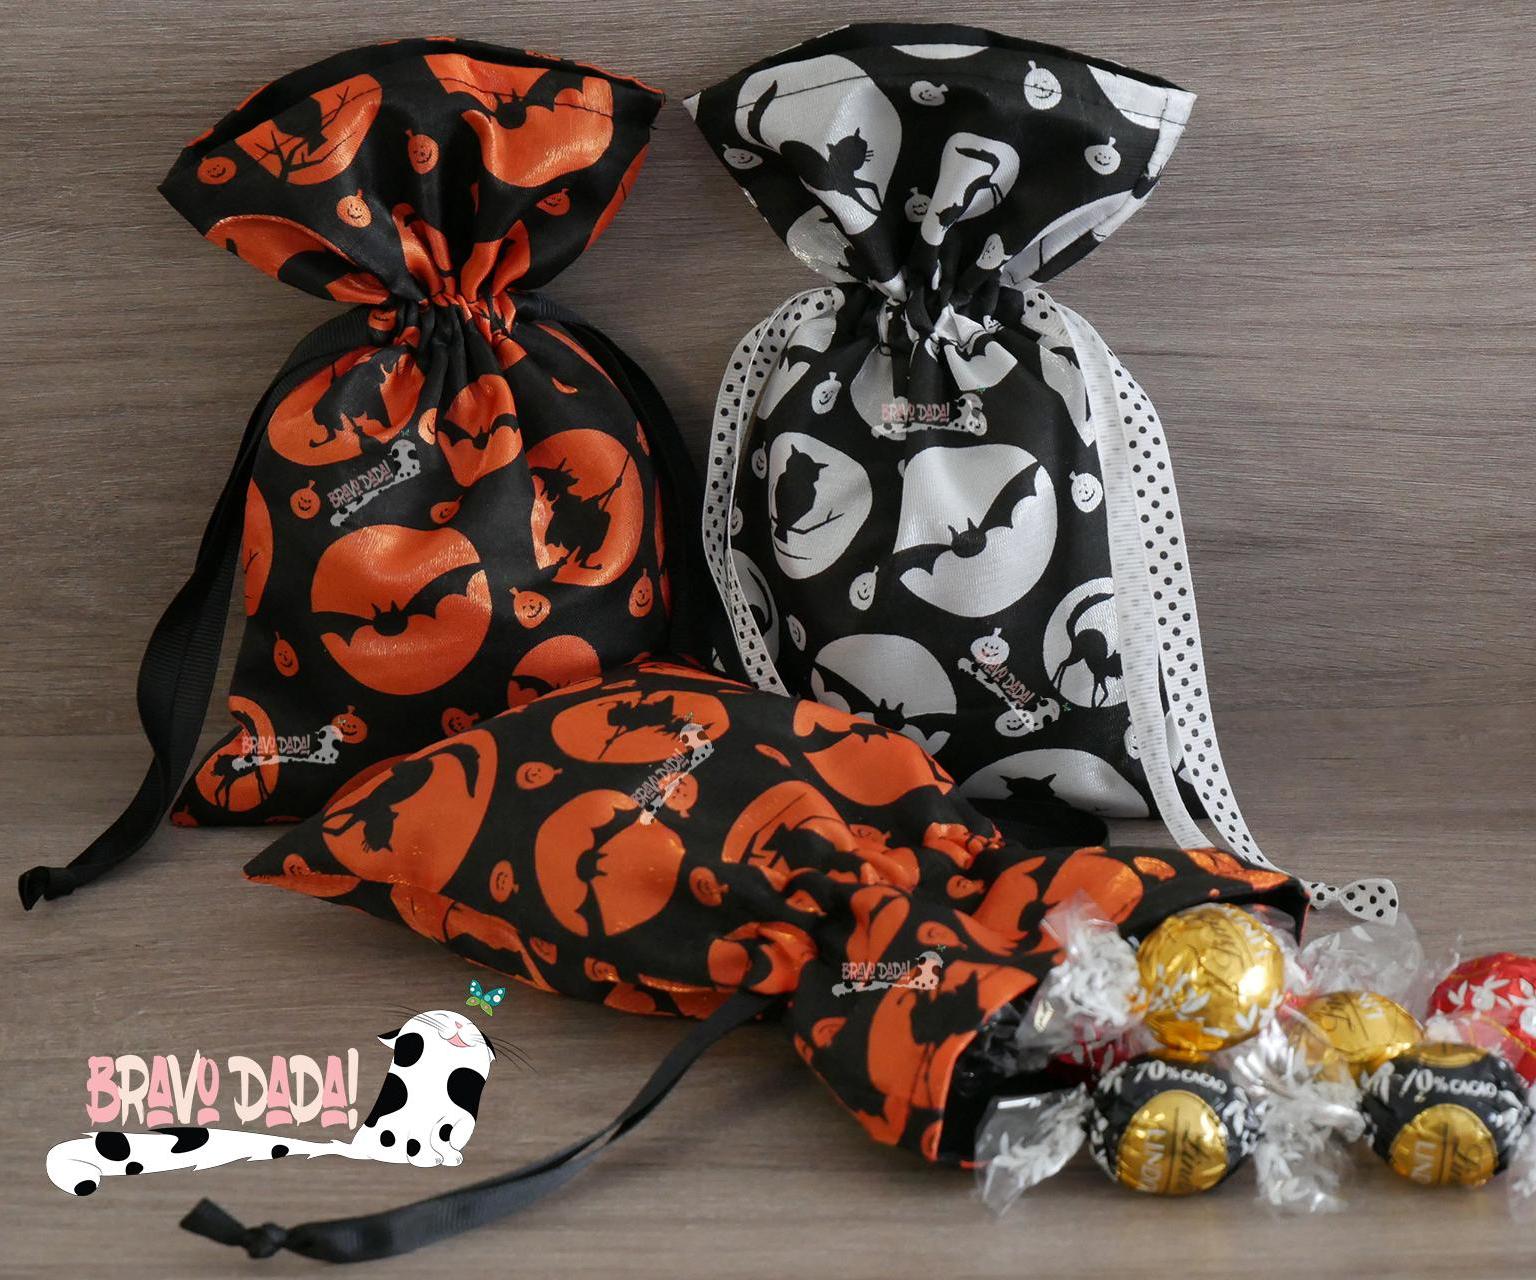 DIY How to Make a Halloween Trick or Treat Lined Drawstring Bag - Bravo Dada! Sewing Tutorial